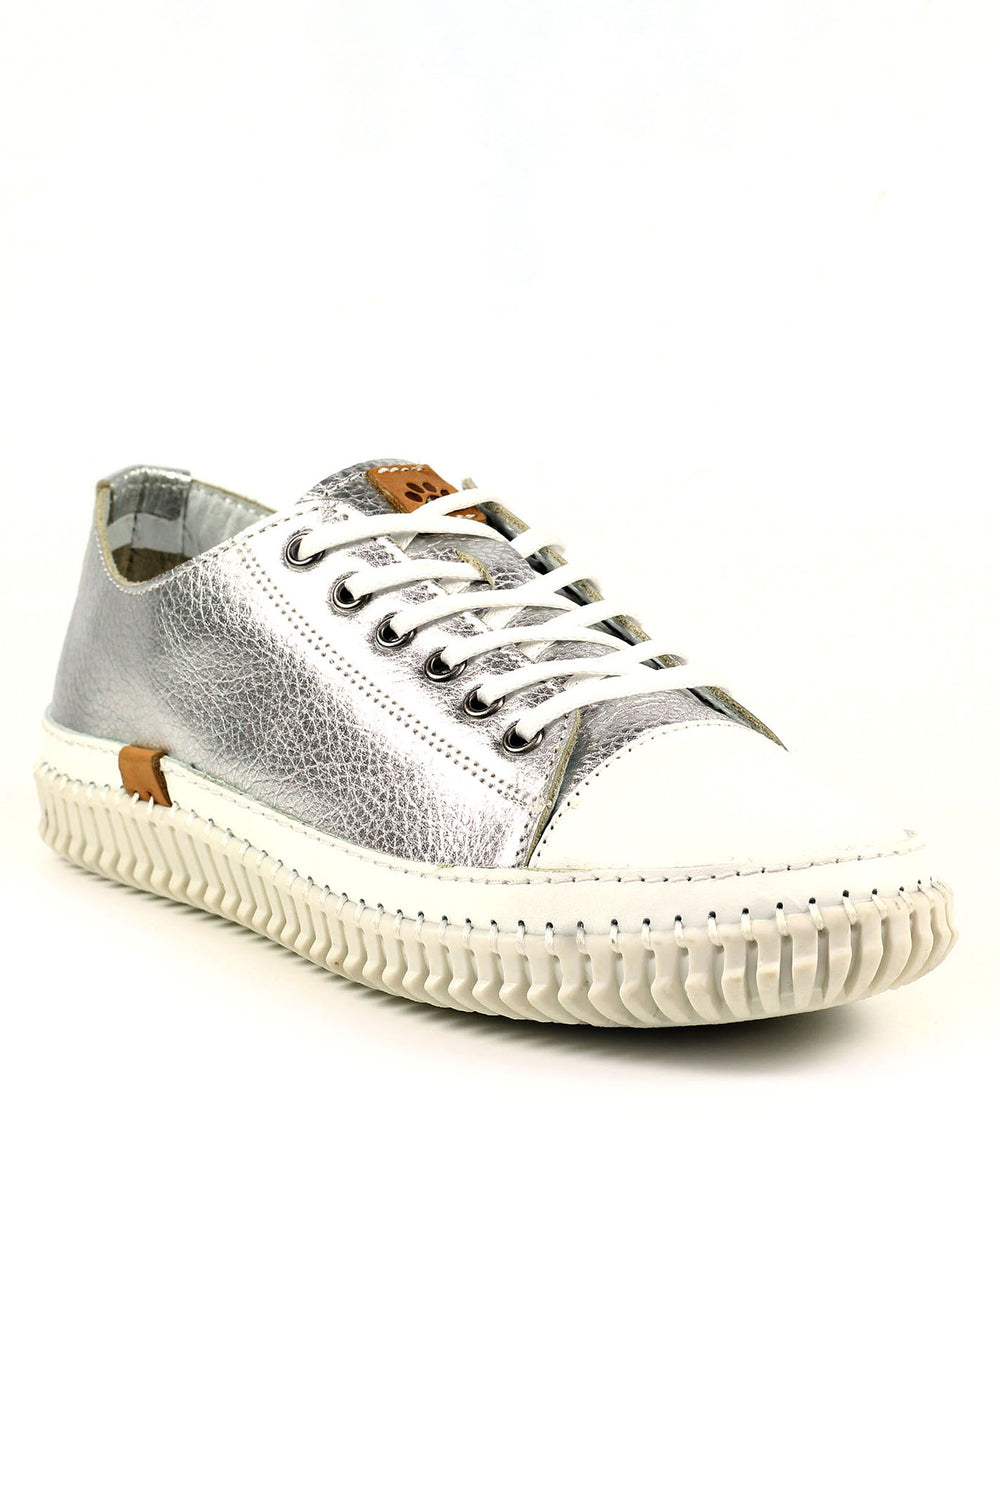 Lunar FLD106 Lazy Dogz Truffle Metallic Silver Leather Shoes - Experience Boutique